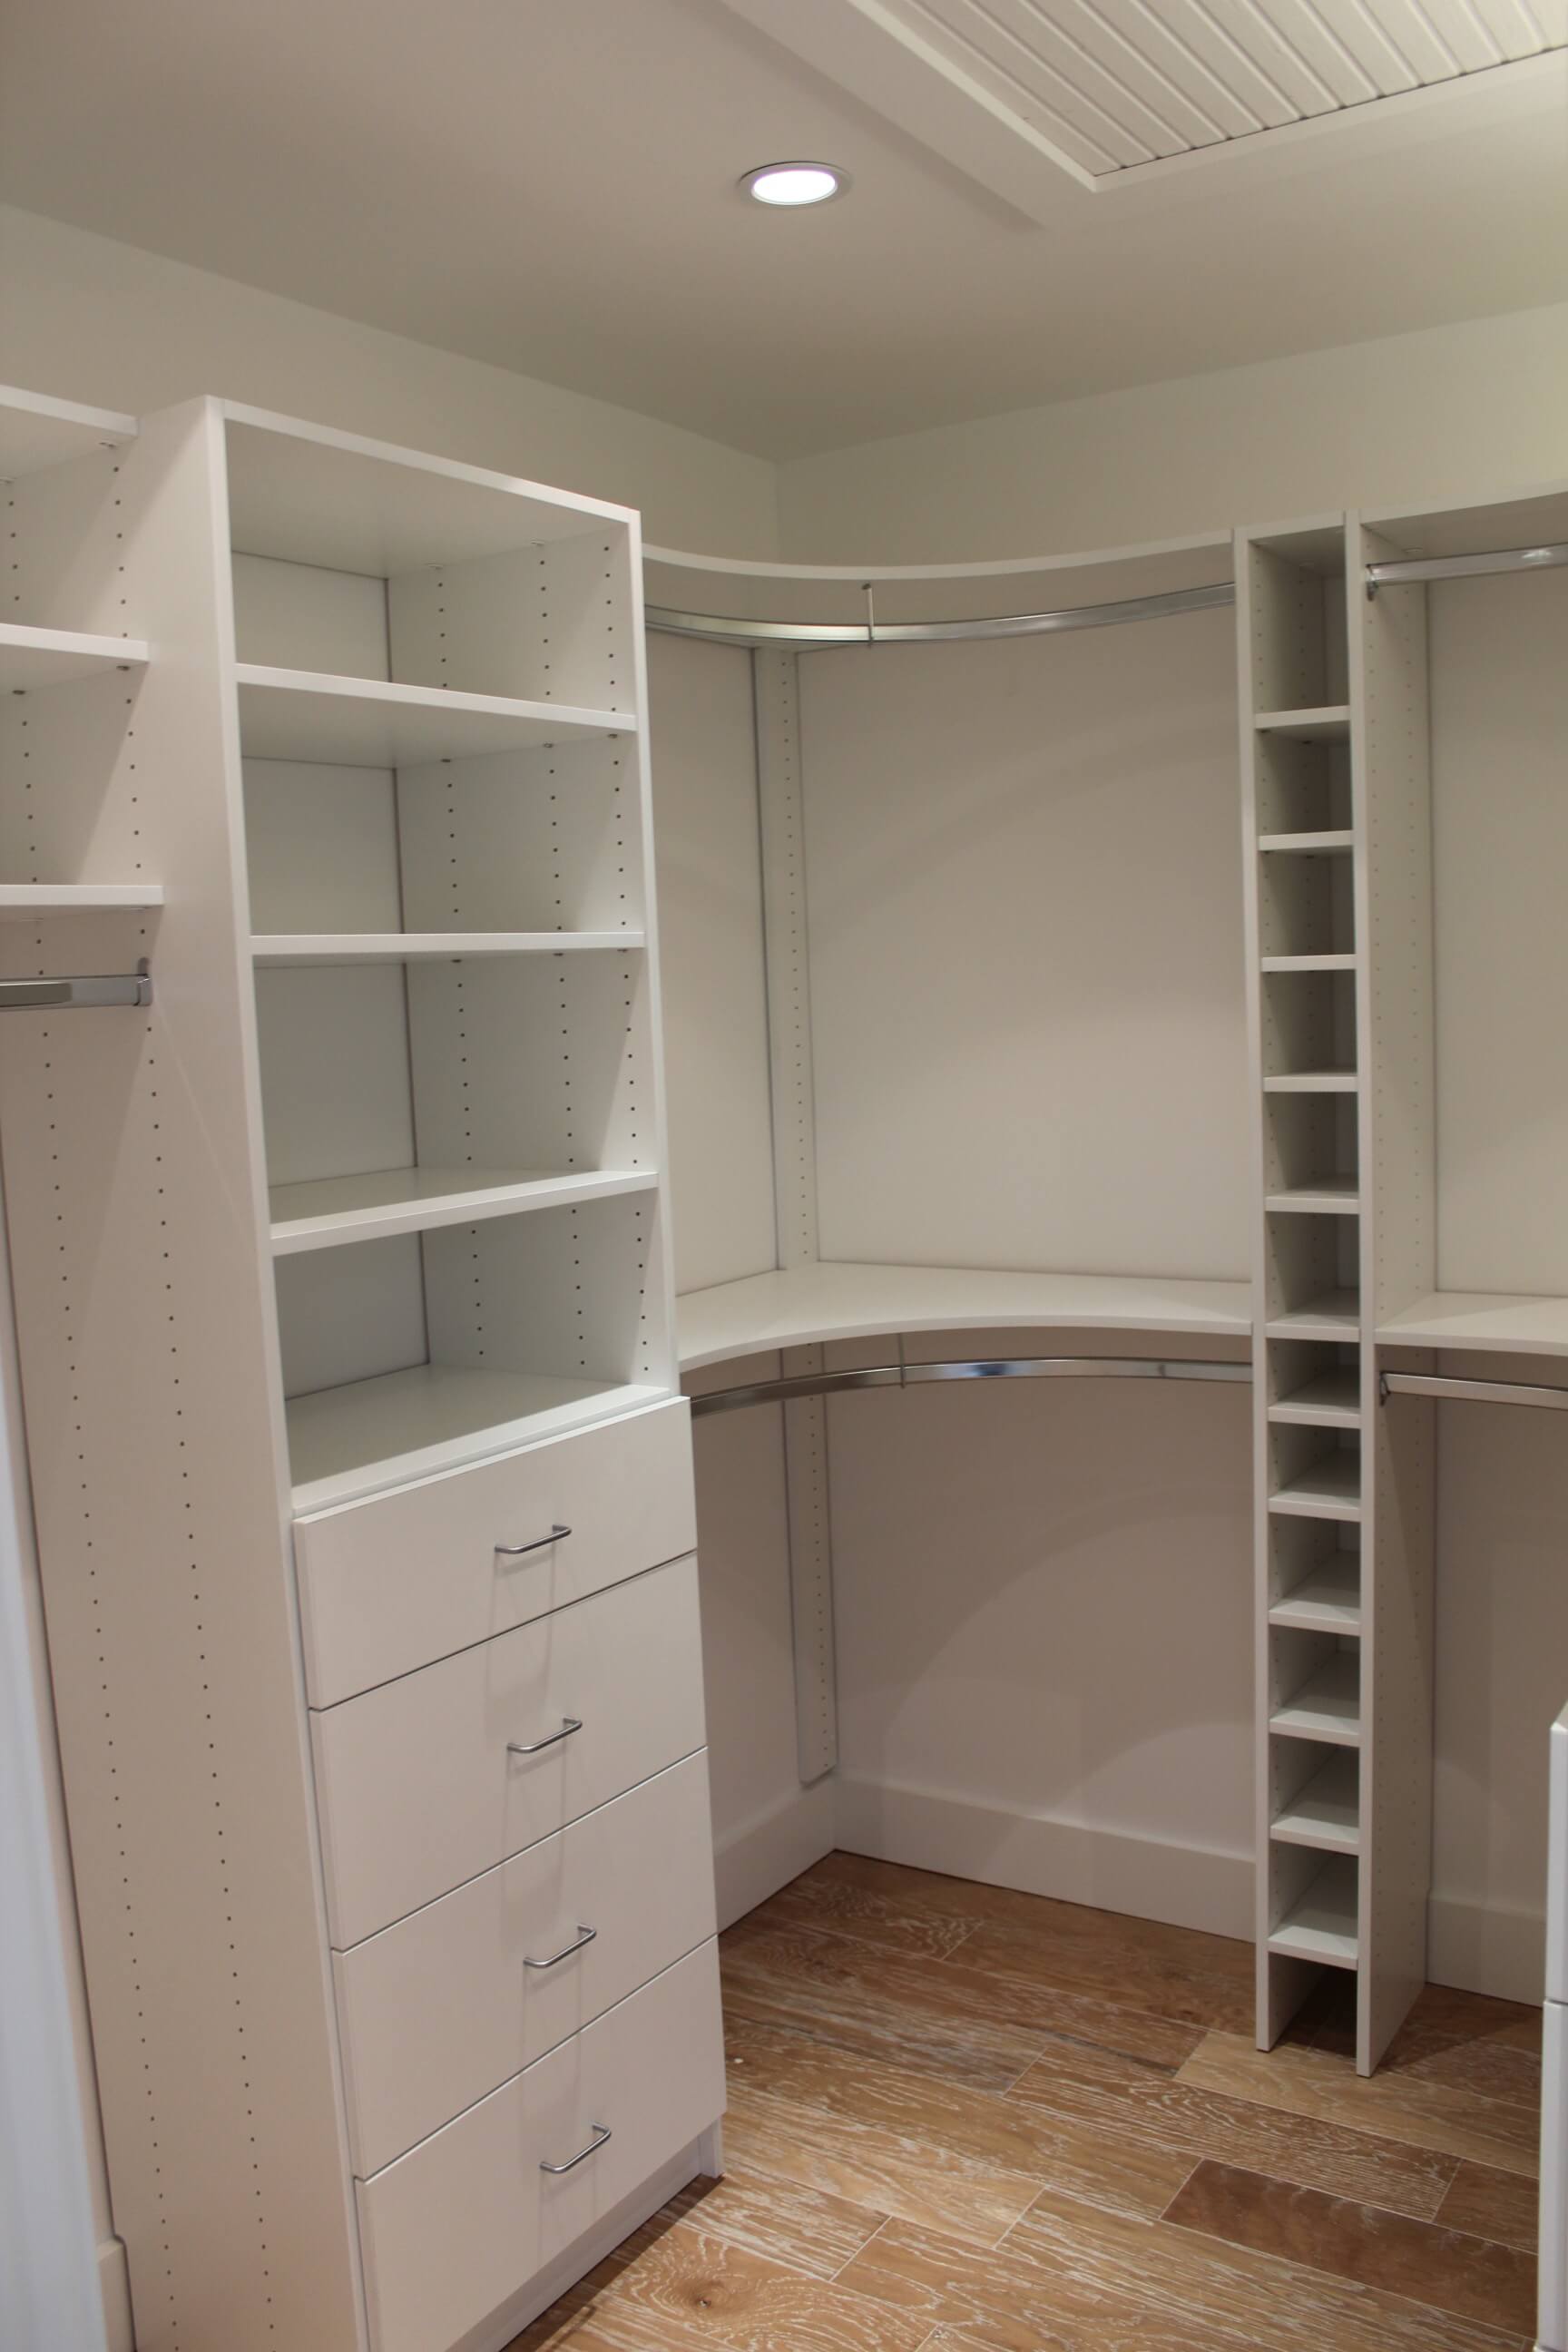 Built in closets and cabinetry